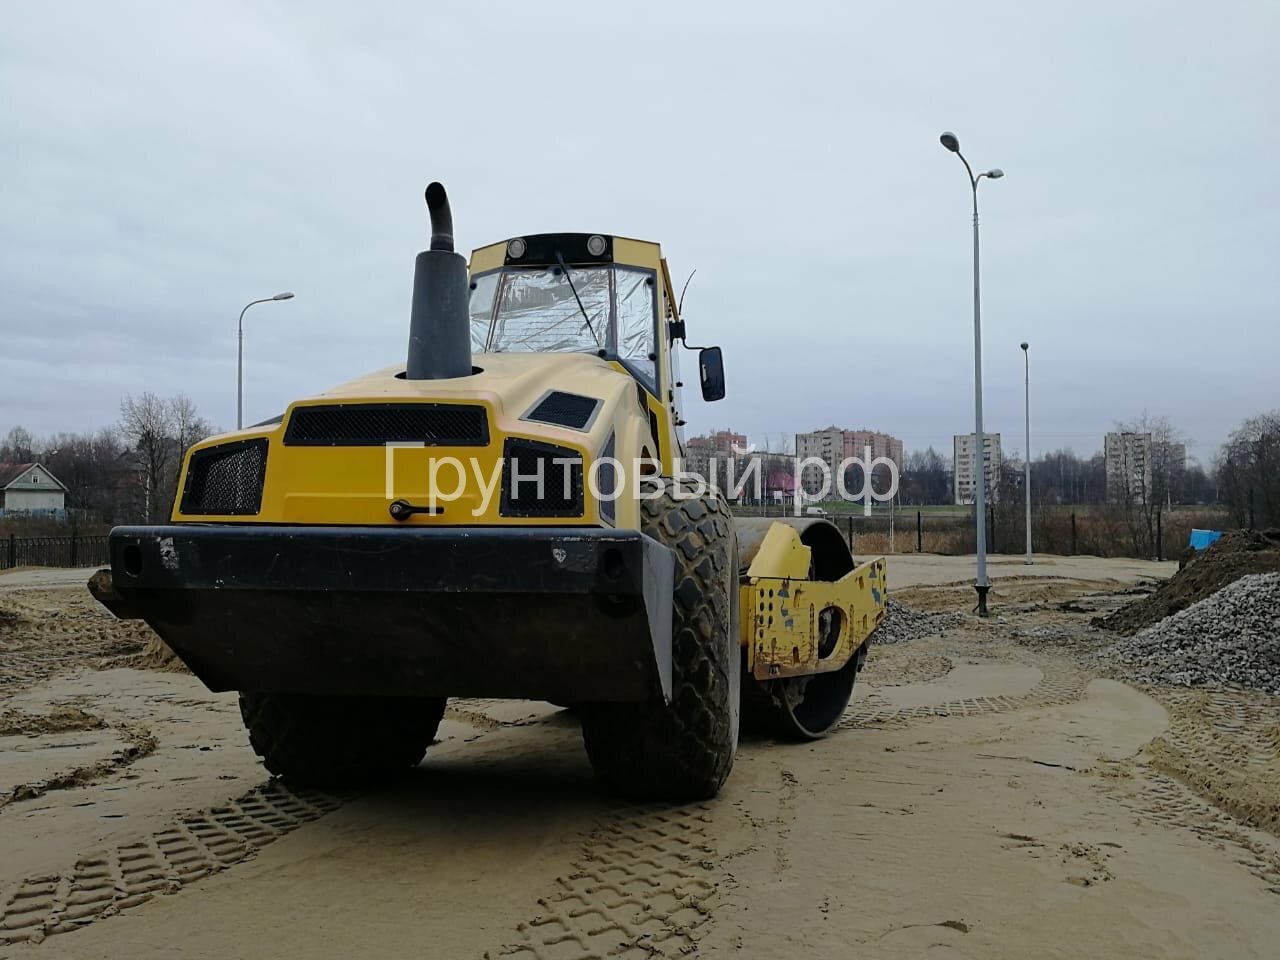 <span style="font-weight: bold;">&nbsp;Грунтовый каток&nbsp; &nbsp; &nbsp; BOMAG 213&nbsp;</span>